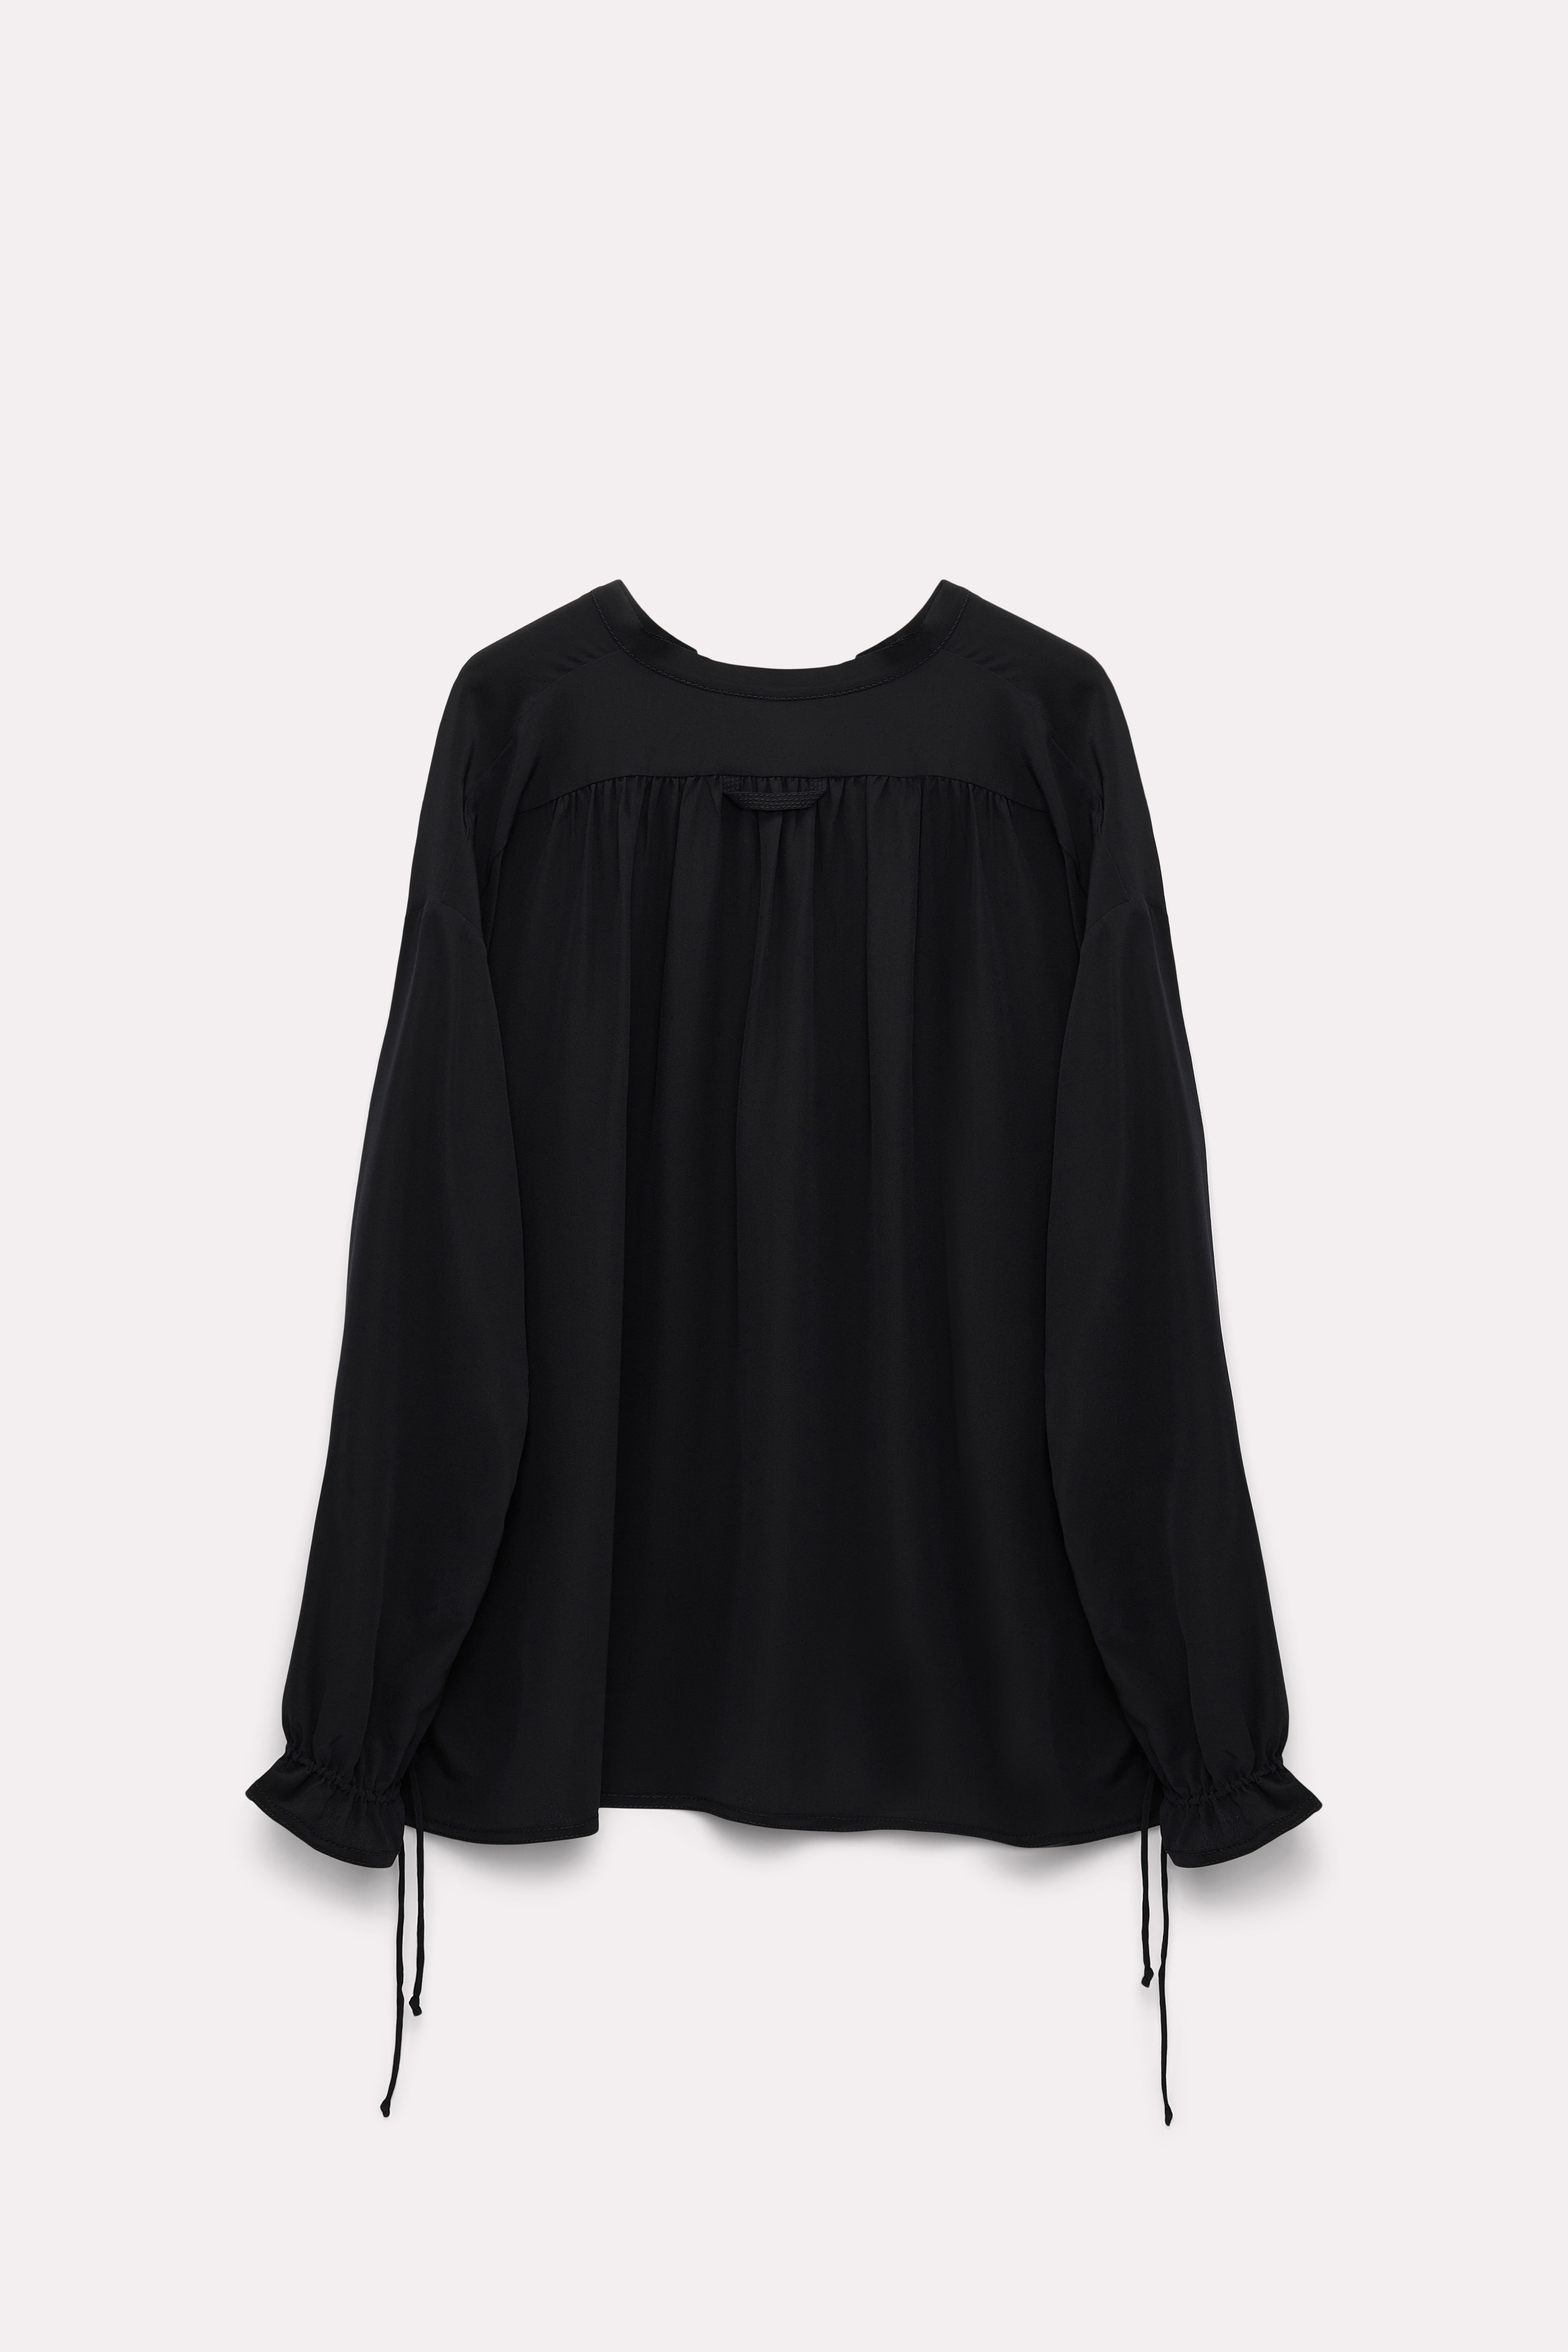 SOPHISTICATED VOLUMES blouse - 7